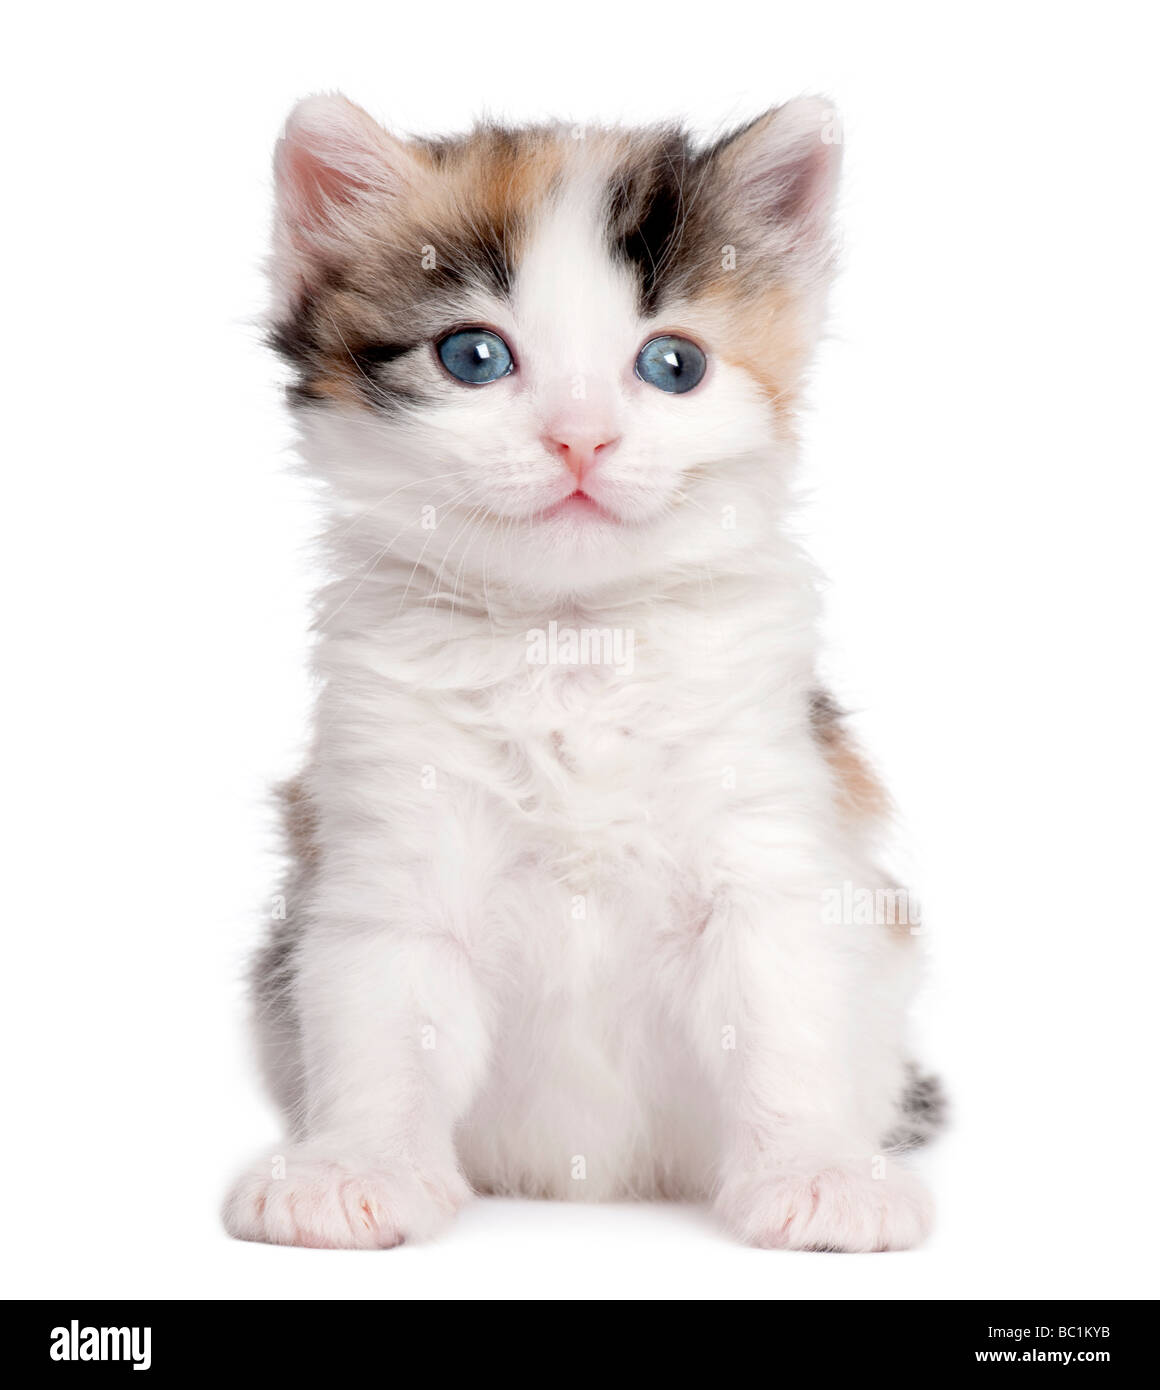 kitten 1 month old in front of a white background Stock Photo